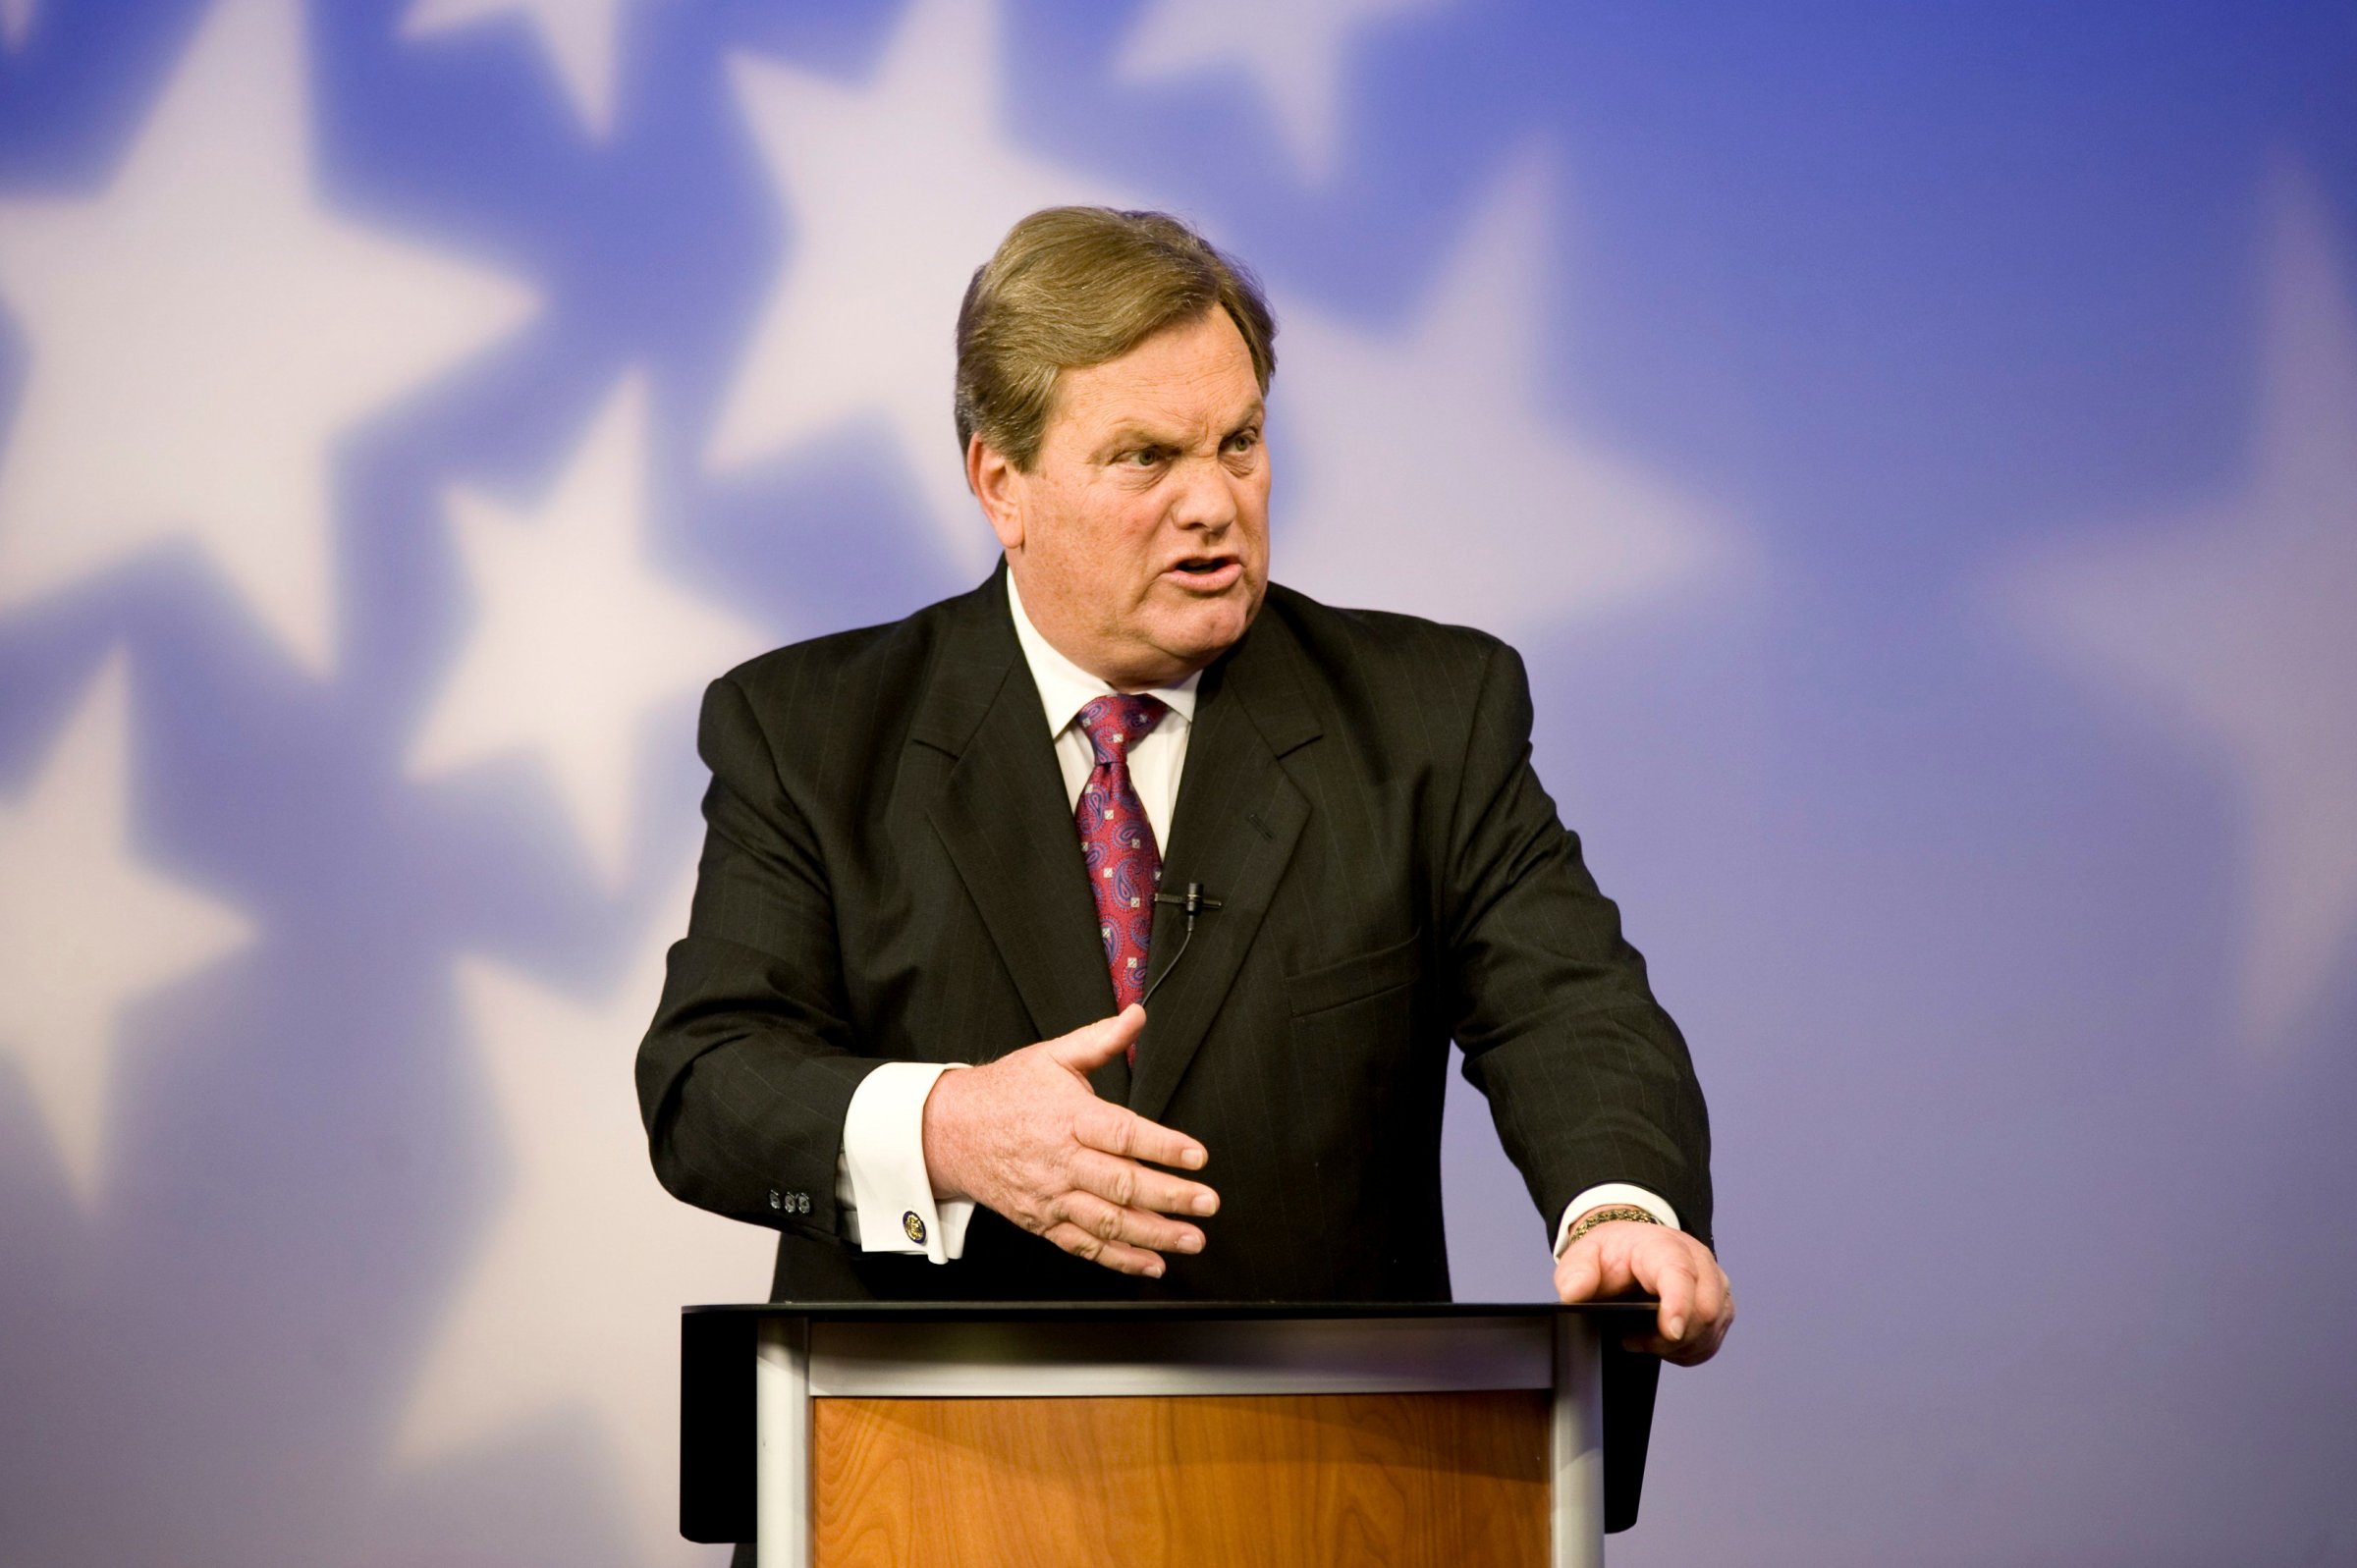 Incumbent Congressman Mike Simpson speaks at a televised debate for the upcoming Republican primary election at the studios of Idaho Public Television in Boise, Idaho May 11, 2014.